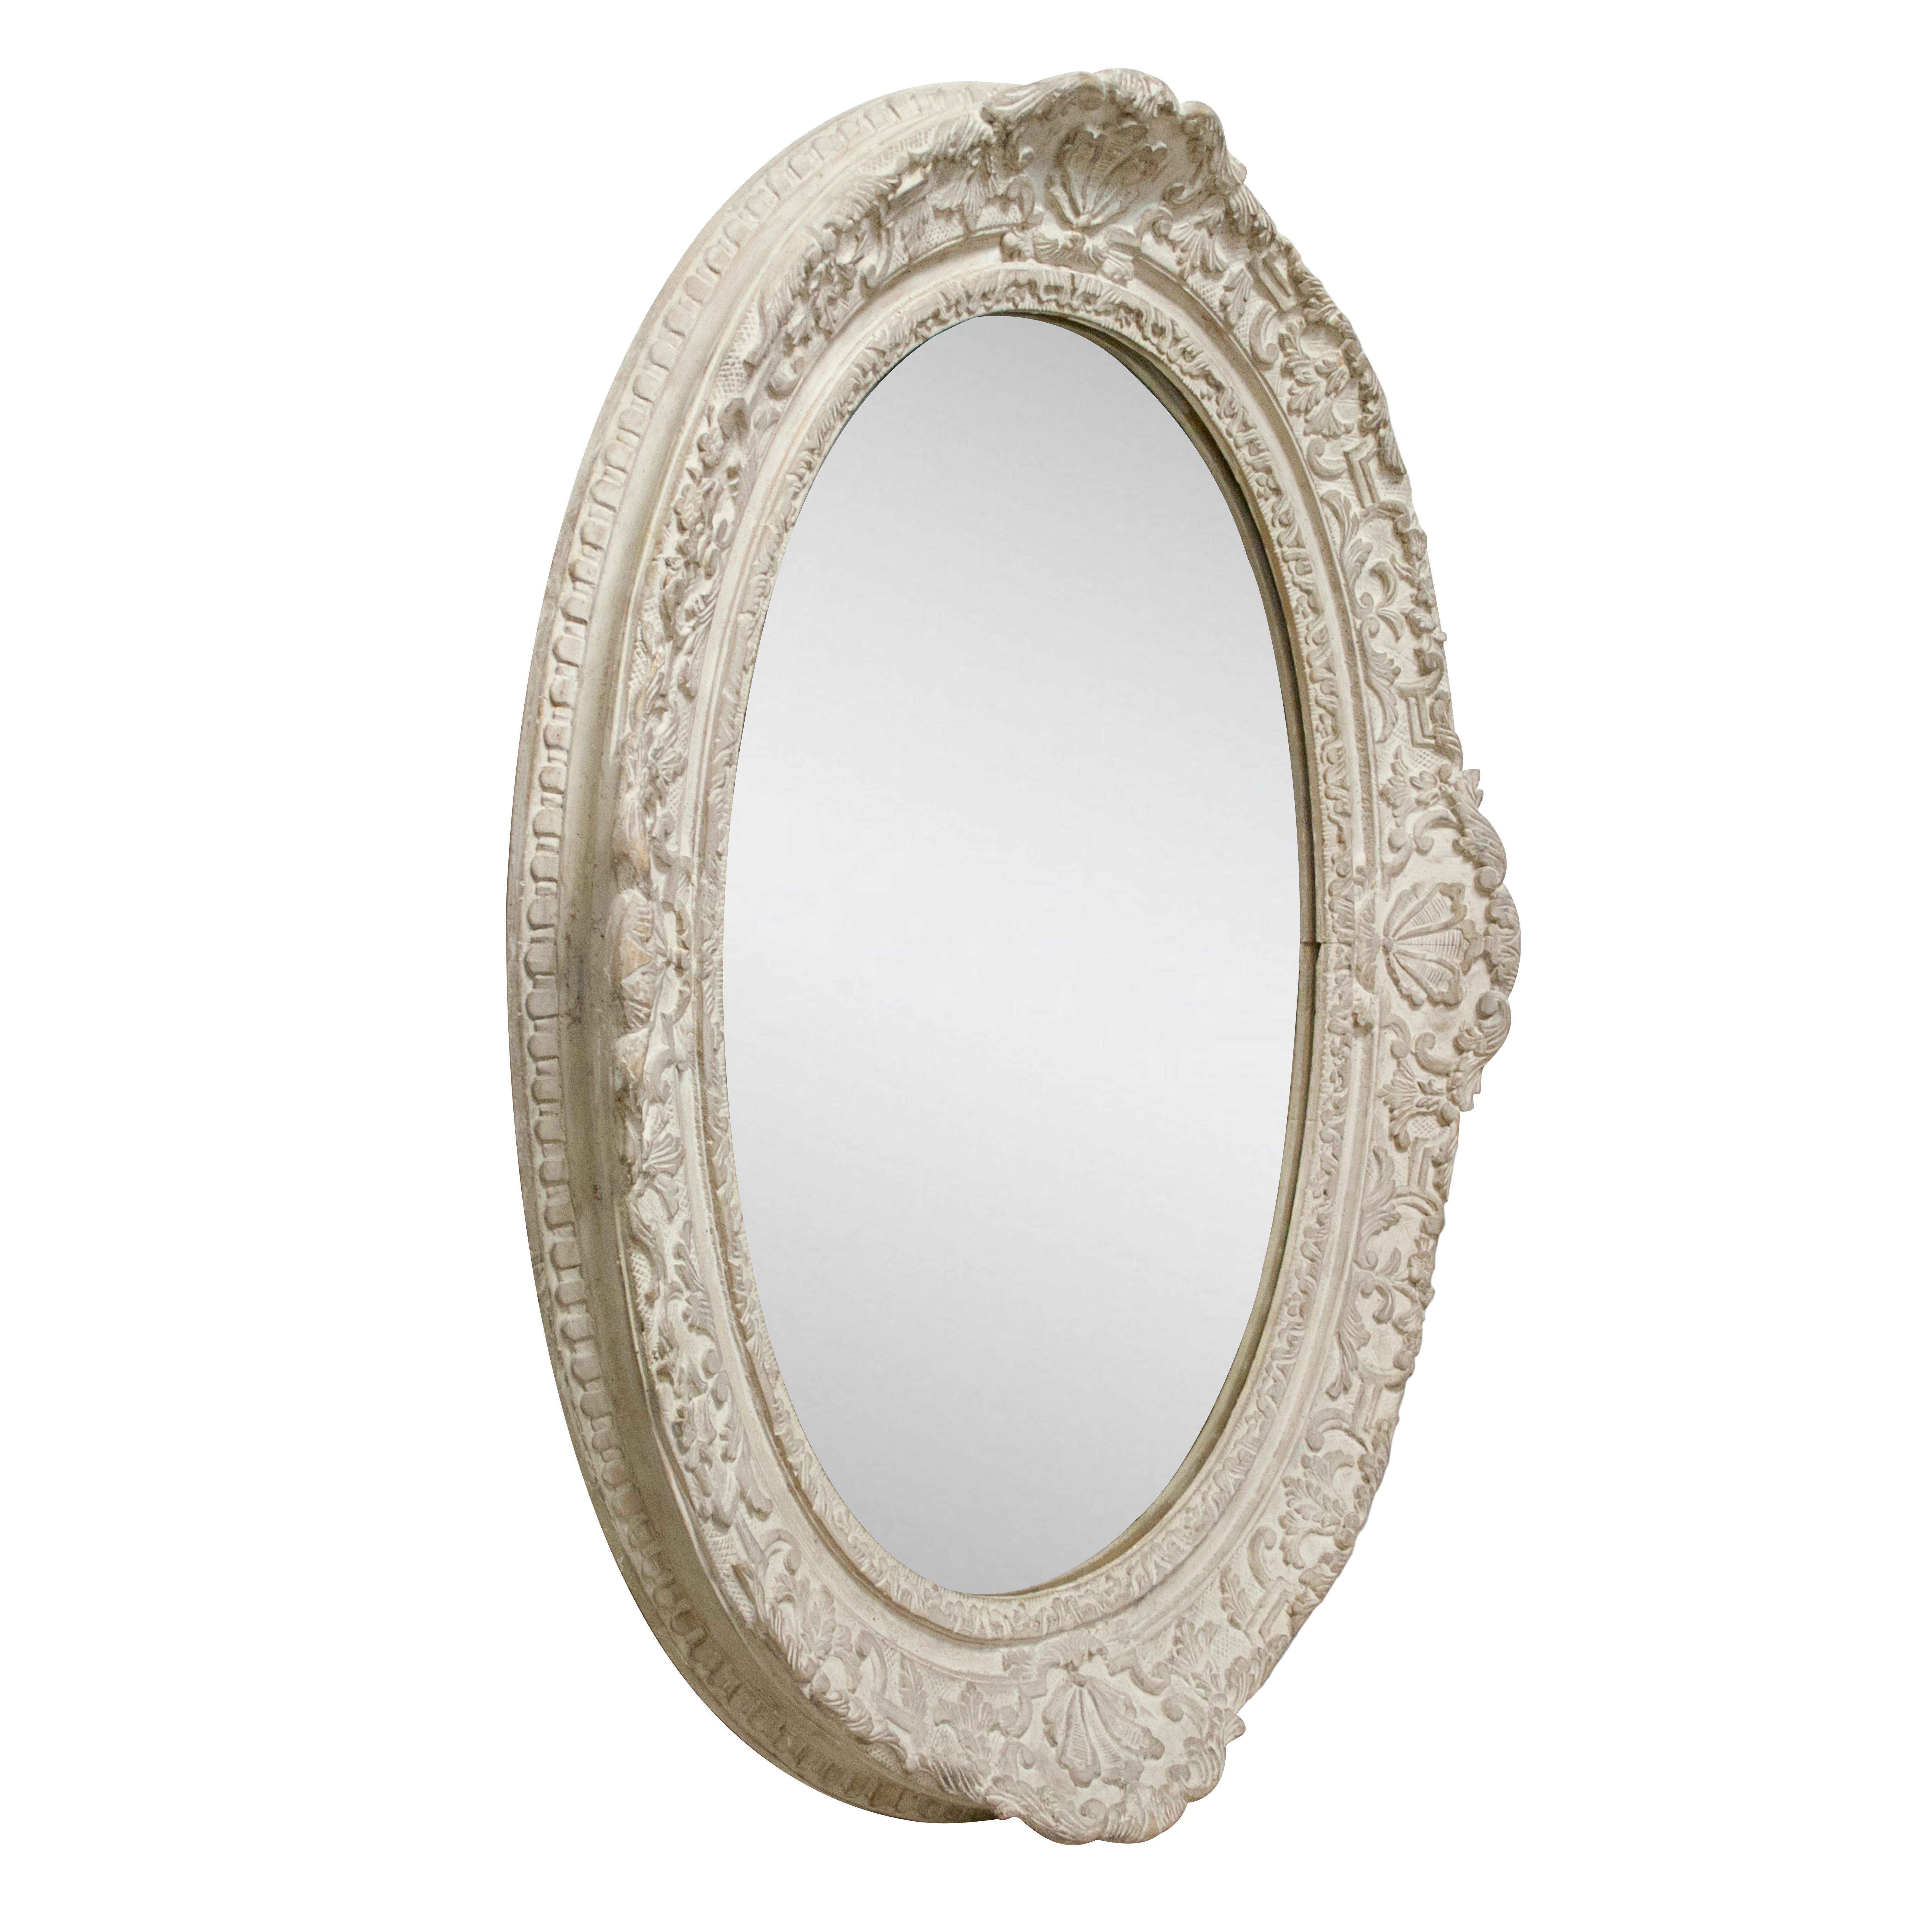 Neoclassical Empire handcrafted mirror. Oval shaped hand carved wooden structure with silver foil finish.
 